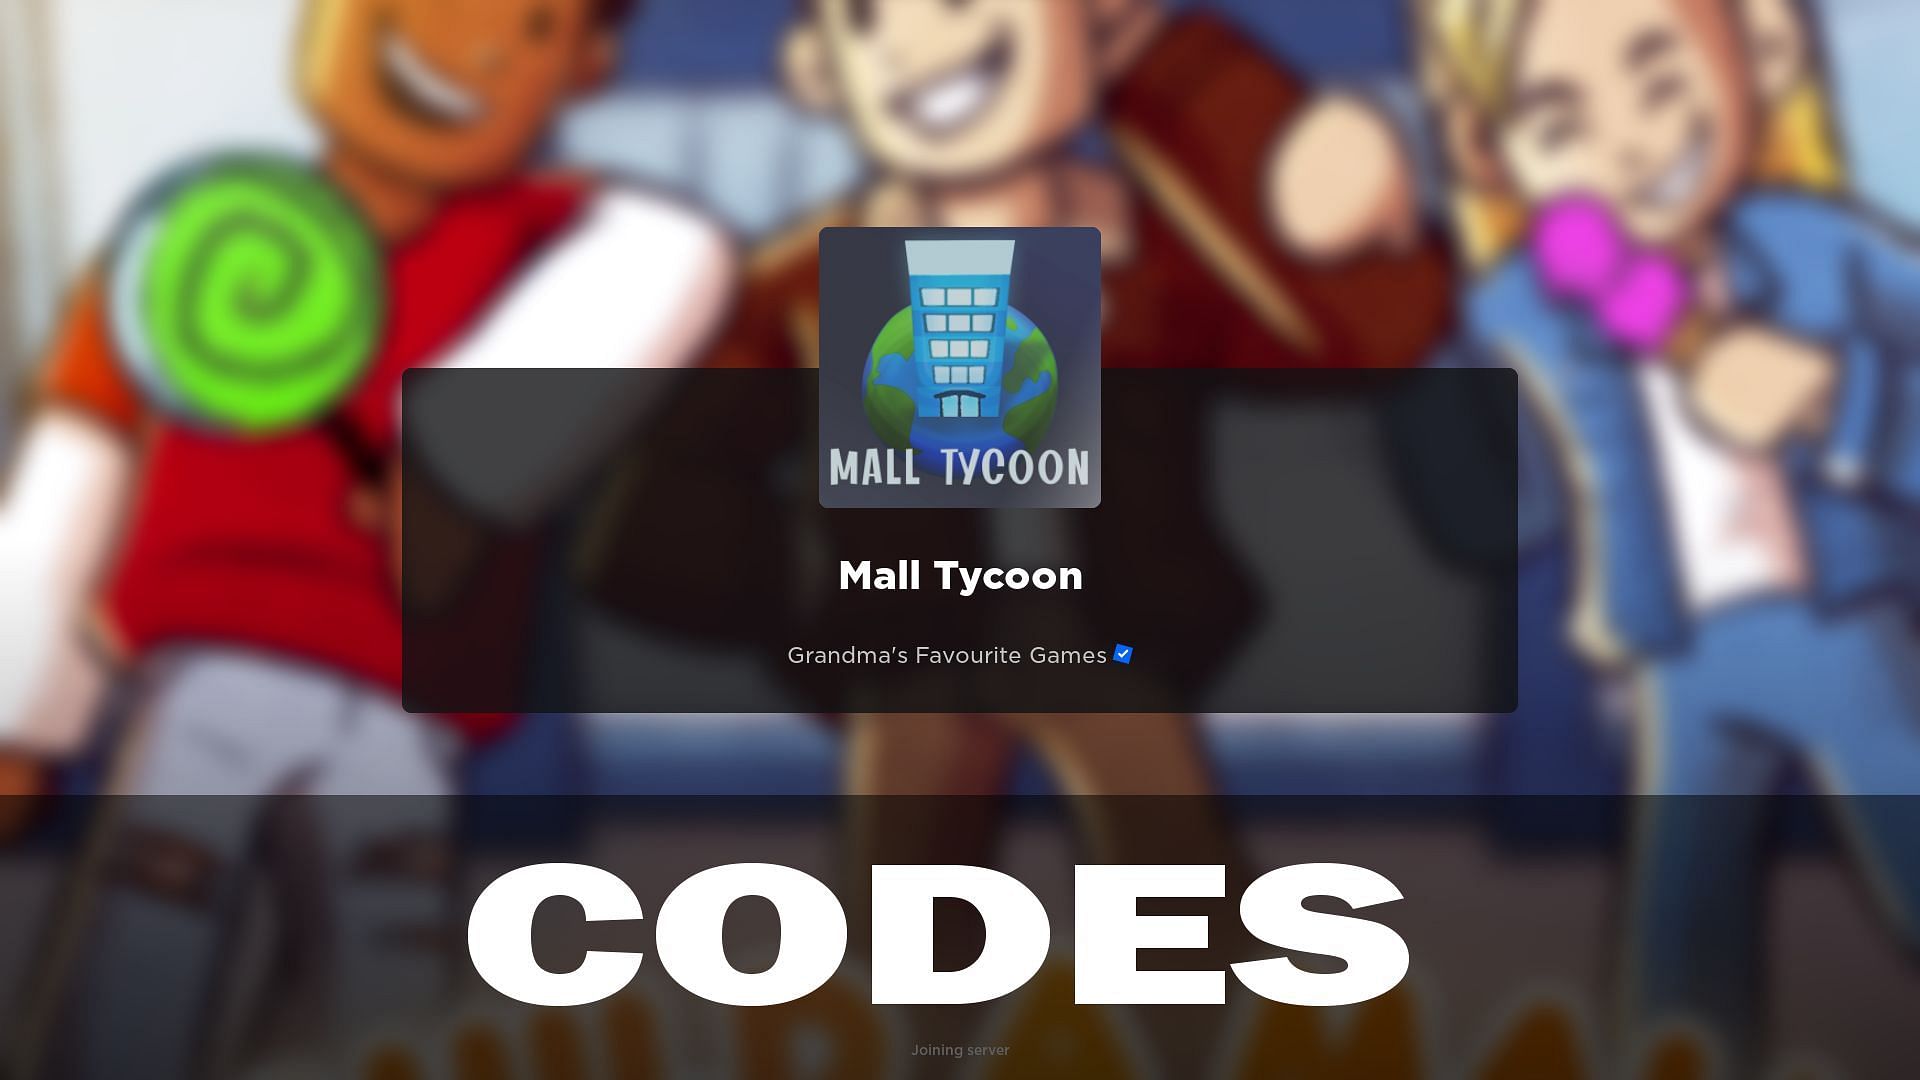 Mall Tycoon codes